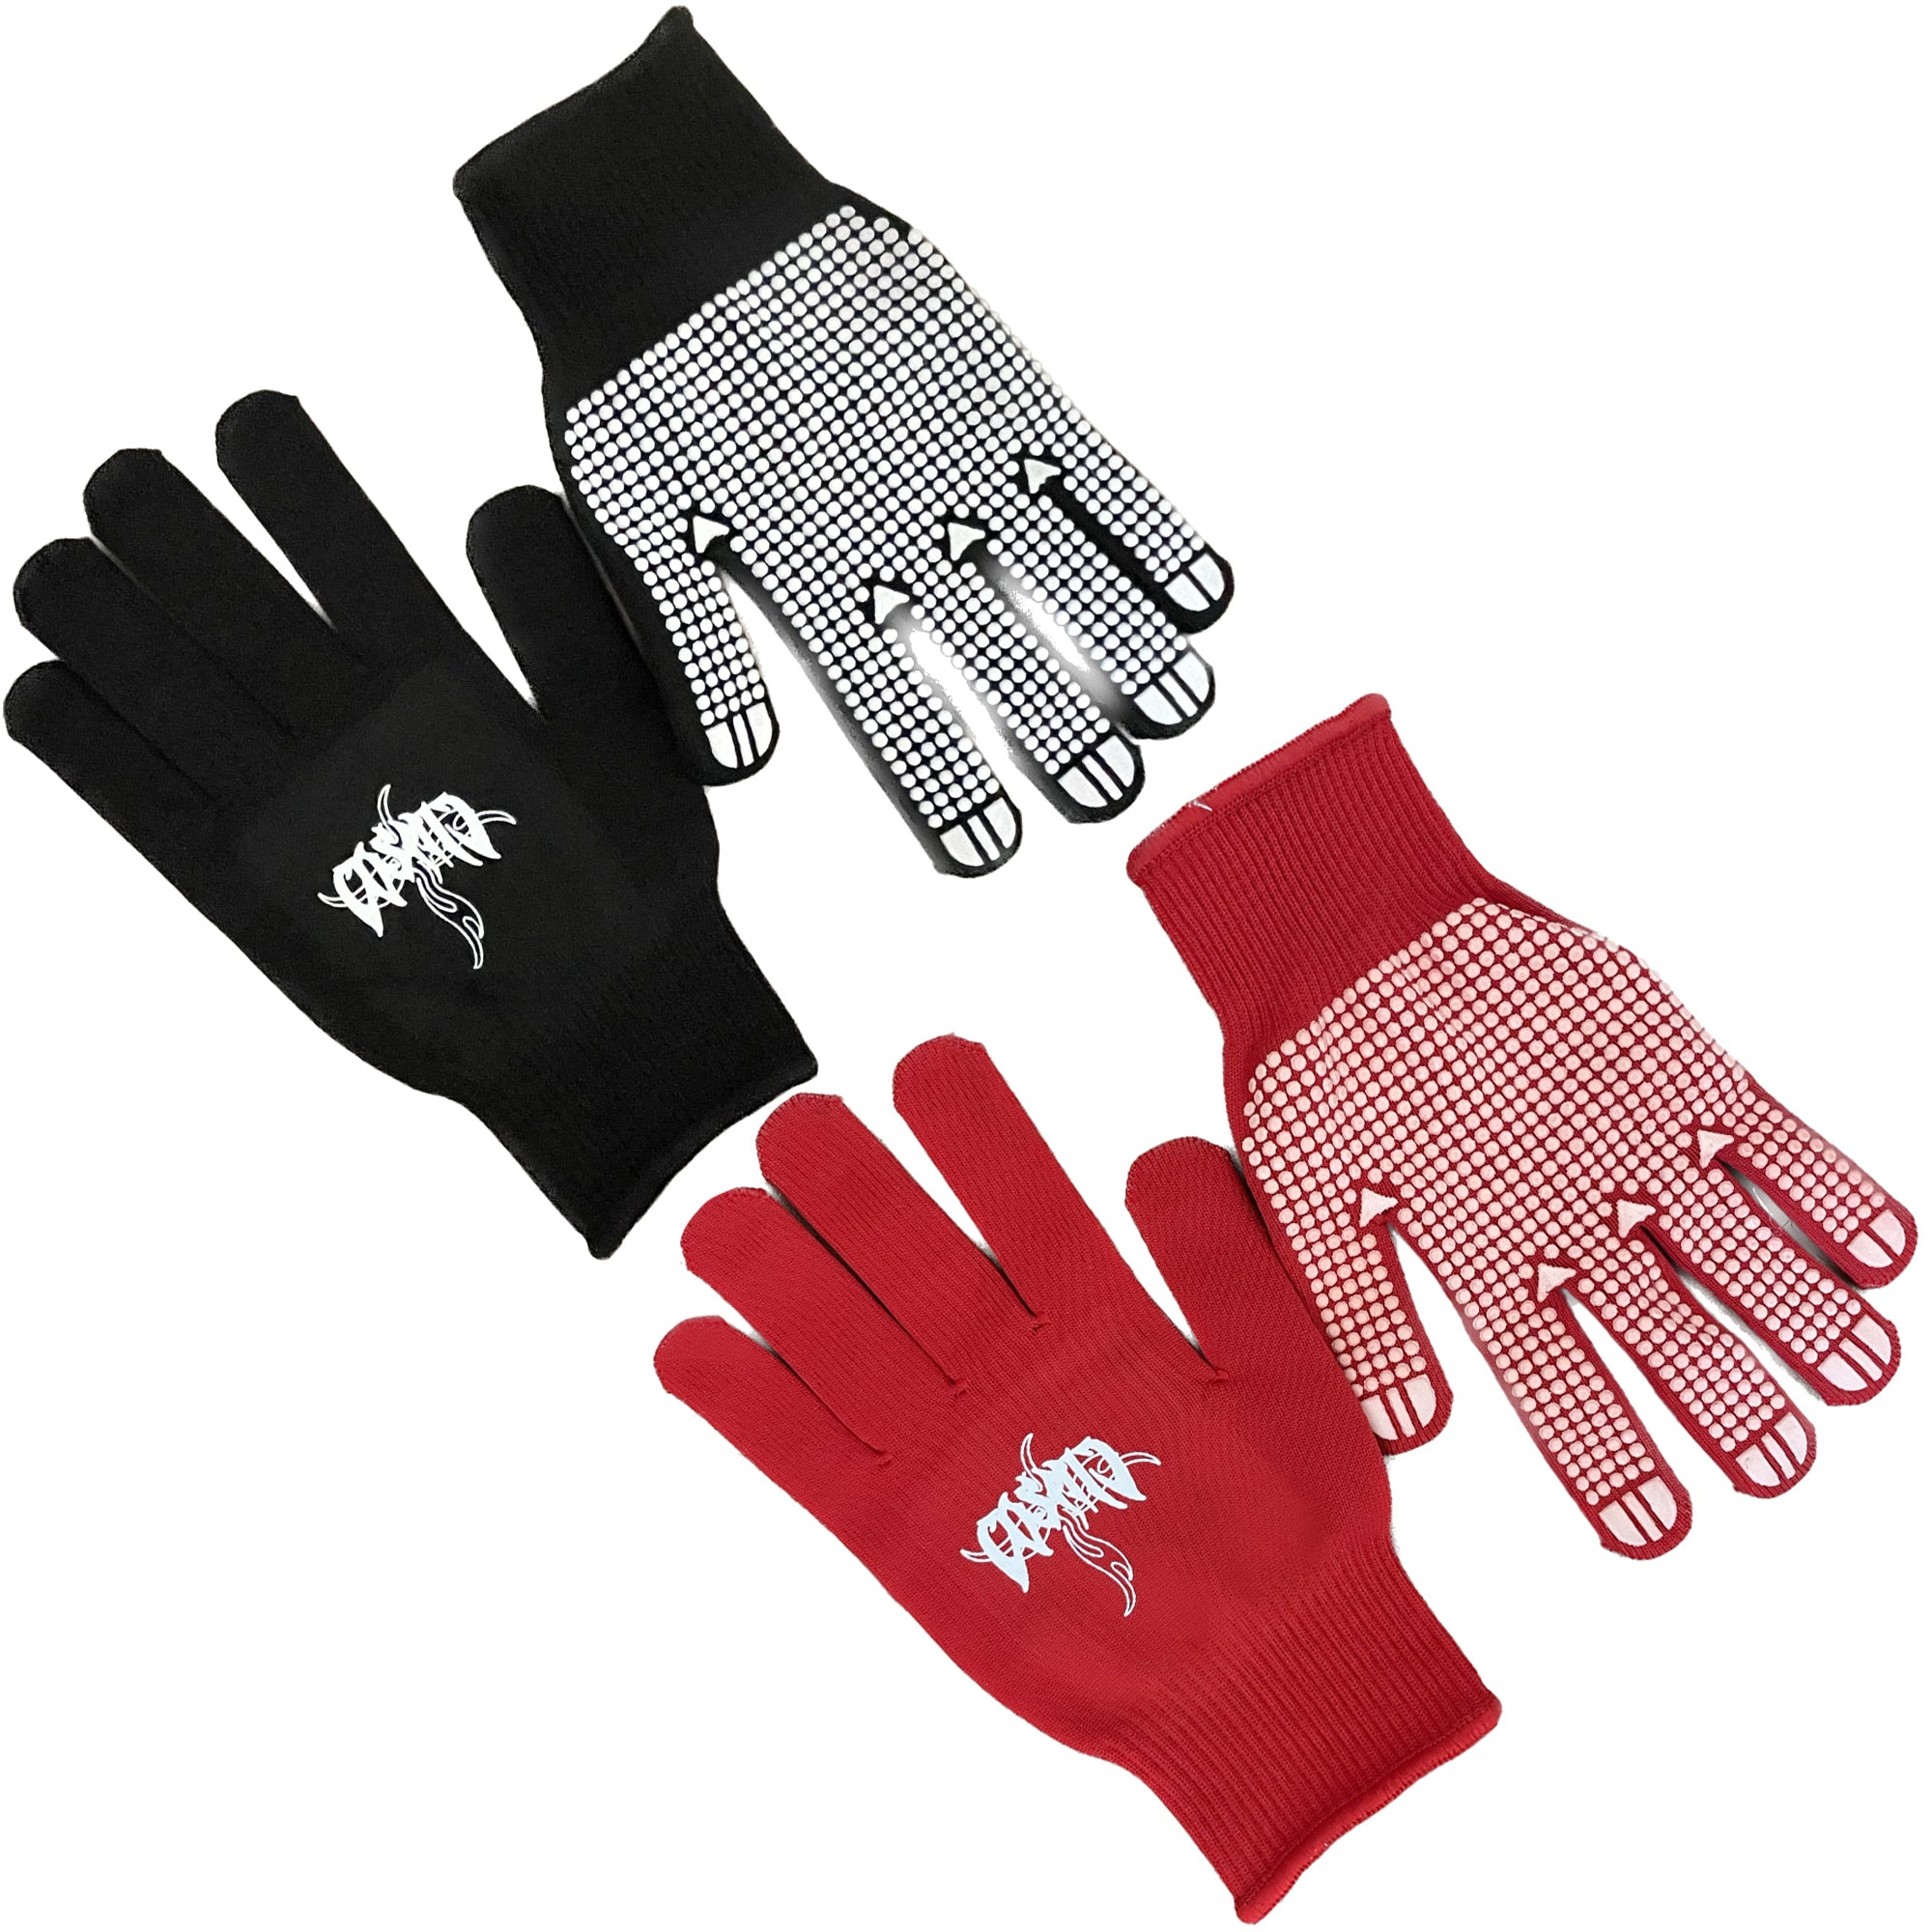 Cosmic the Oasis knit gloves, available in black and red, are made from durable poly material with rubber pads on the palms and fingers. Lightweight and breathable, they offer style and comfort.